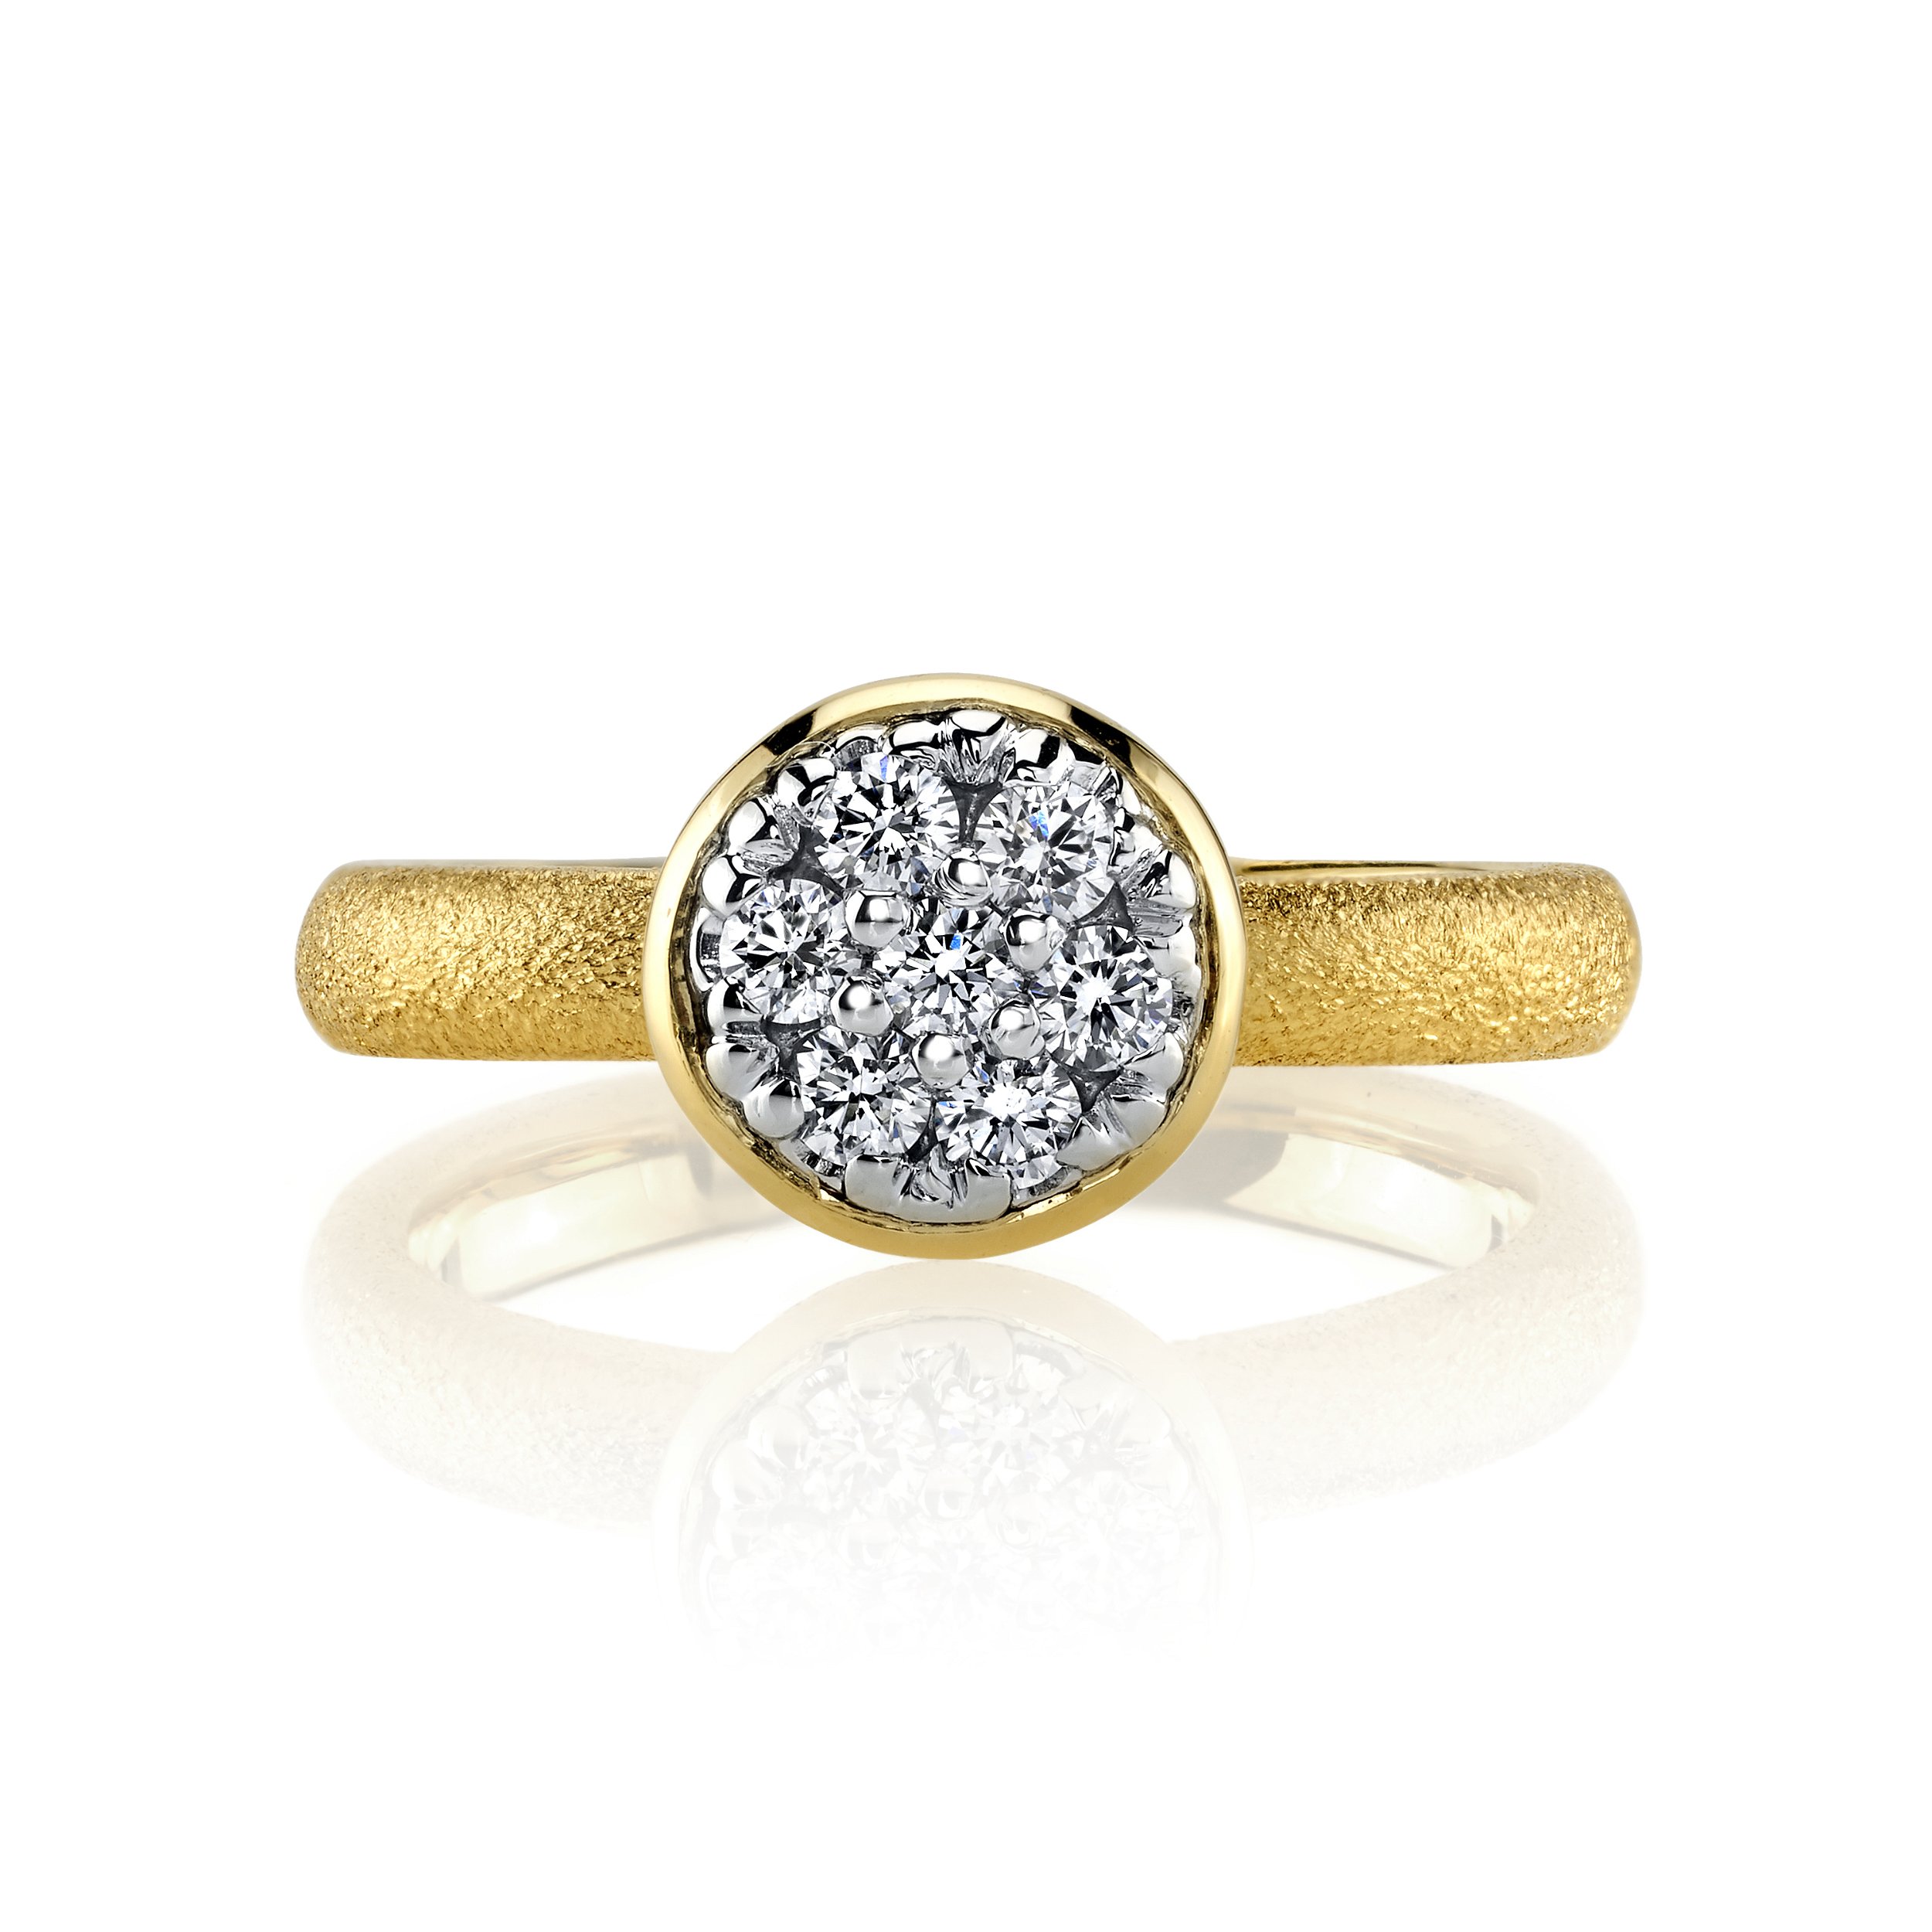 Pave Diamond Ring with Aspen Finish in 18kt Yellow Gold